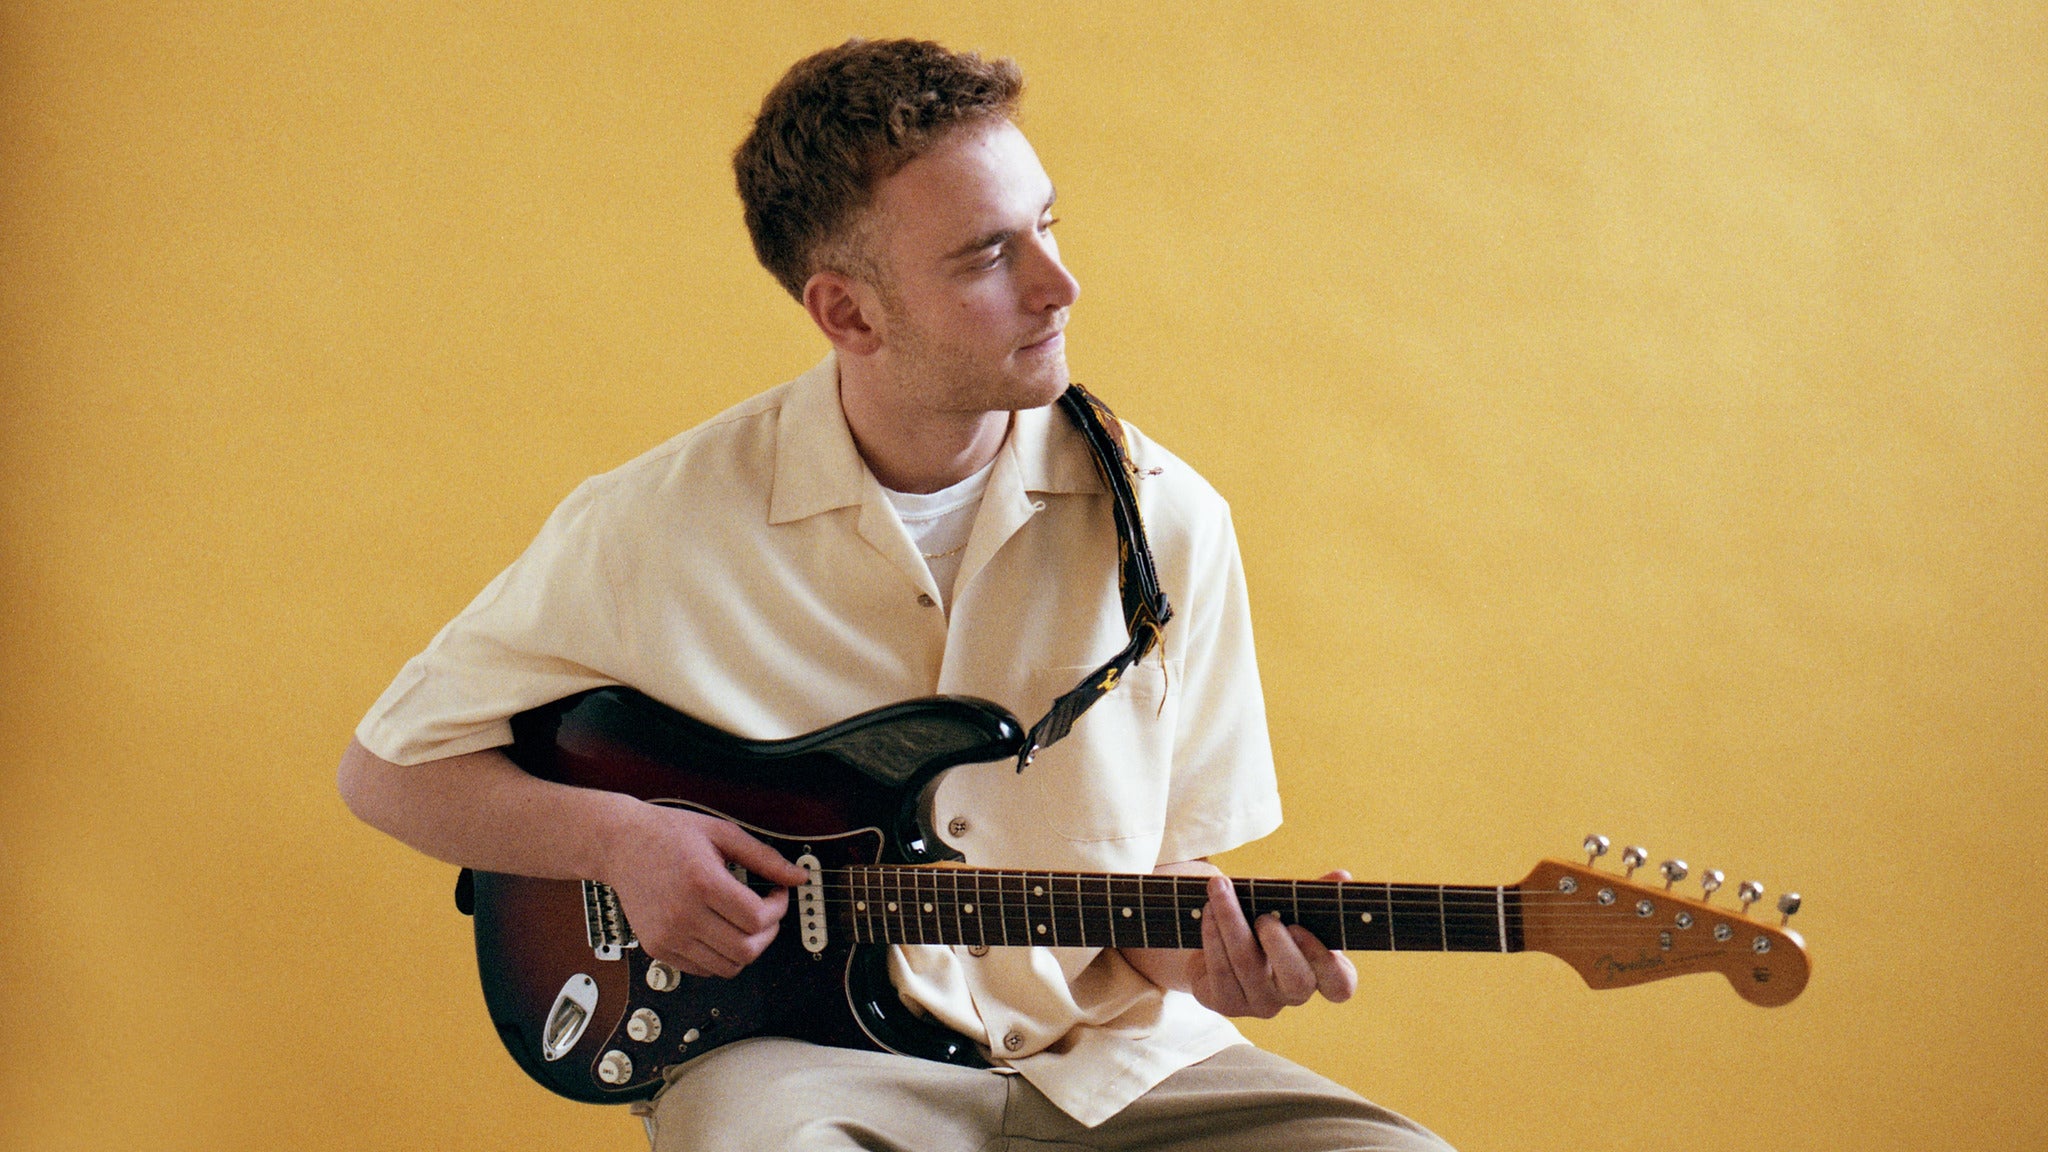 Image used with permission from Ticketmaster | Tom Misch - Elemental Nights tickets